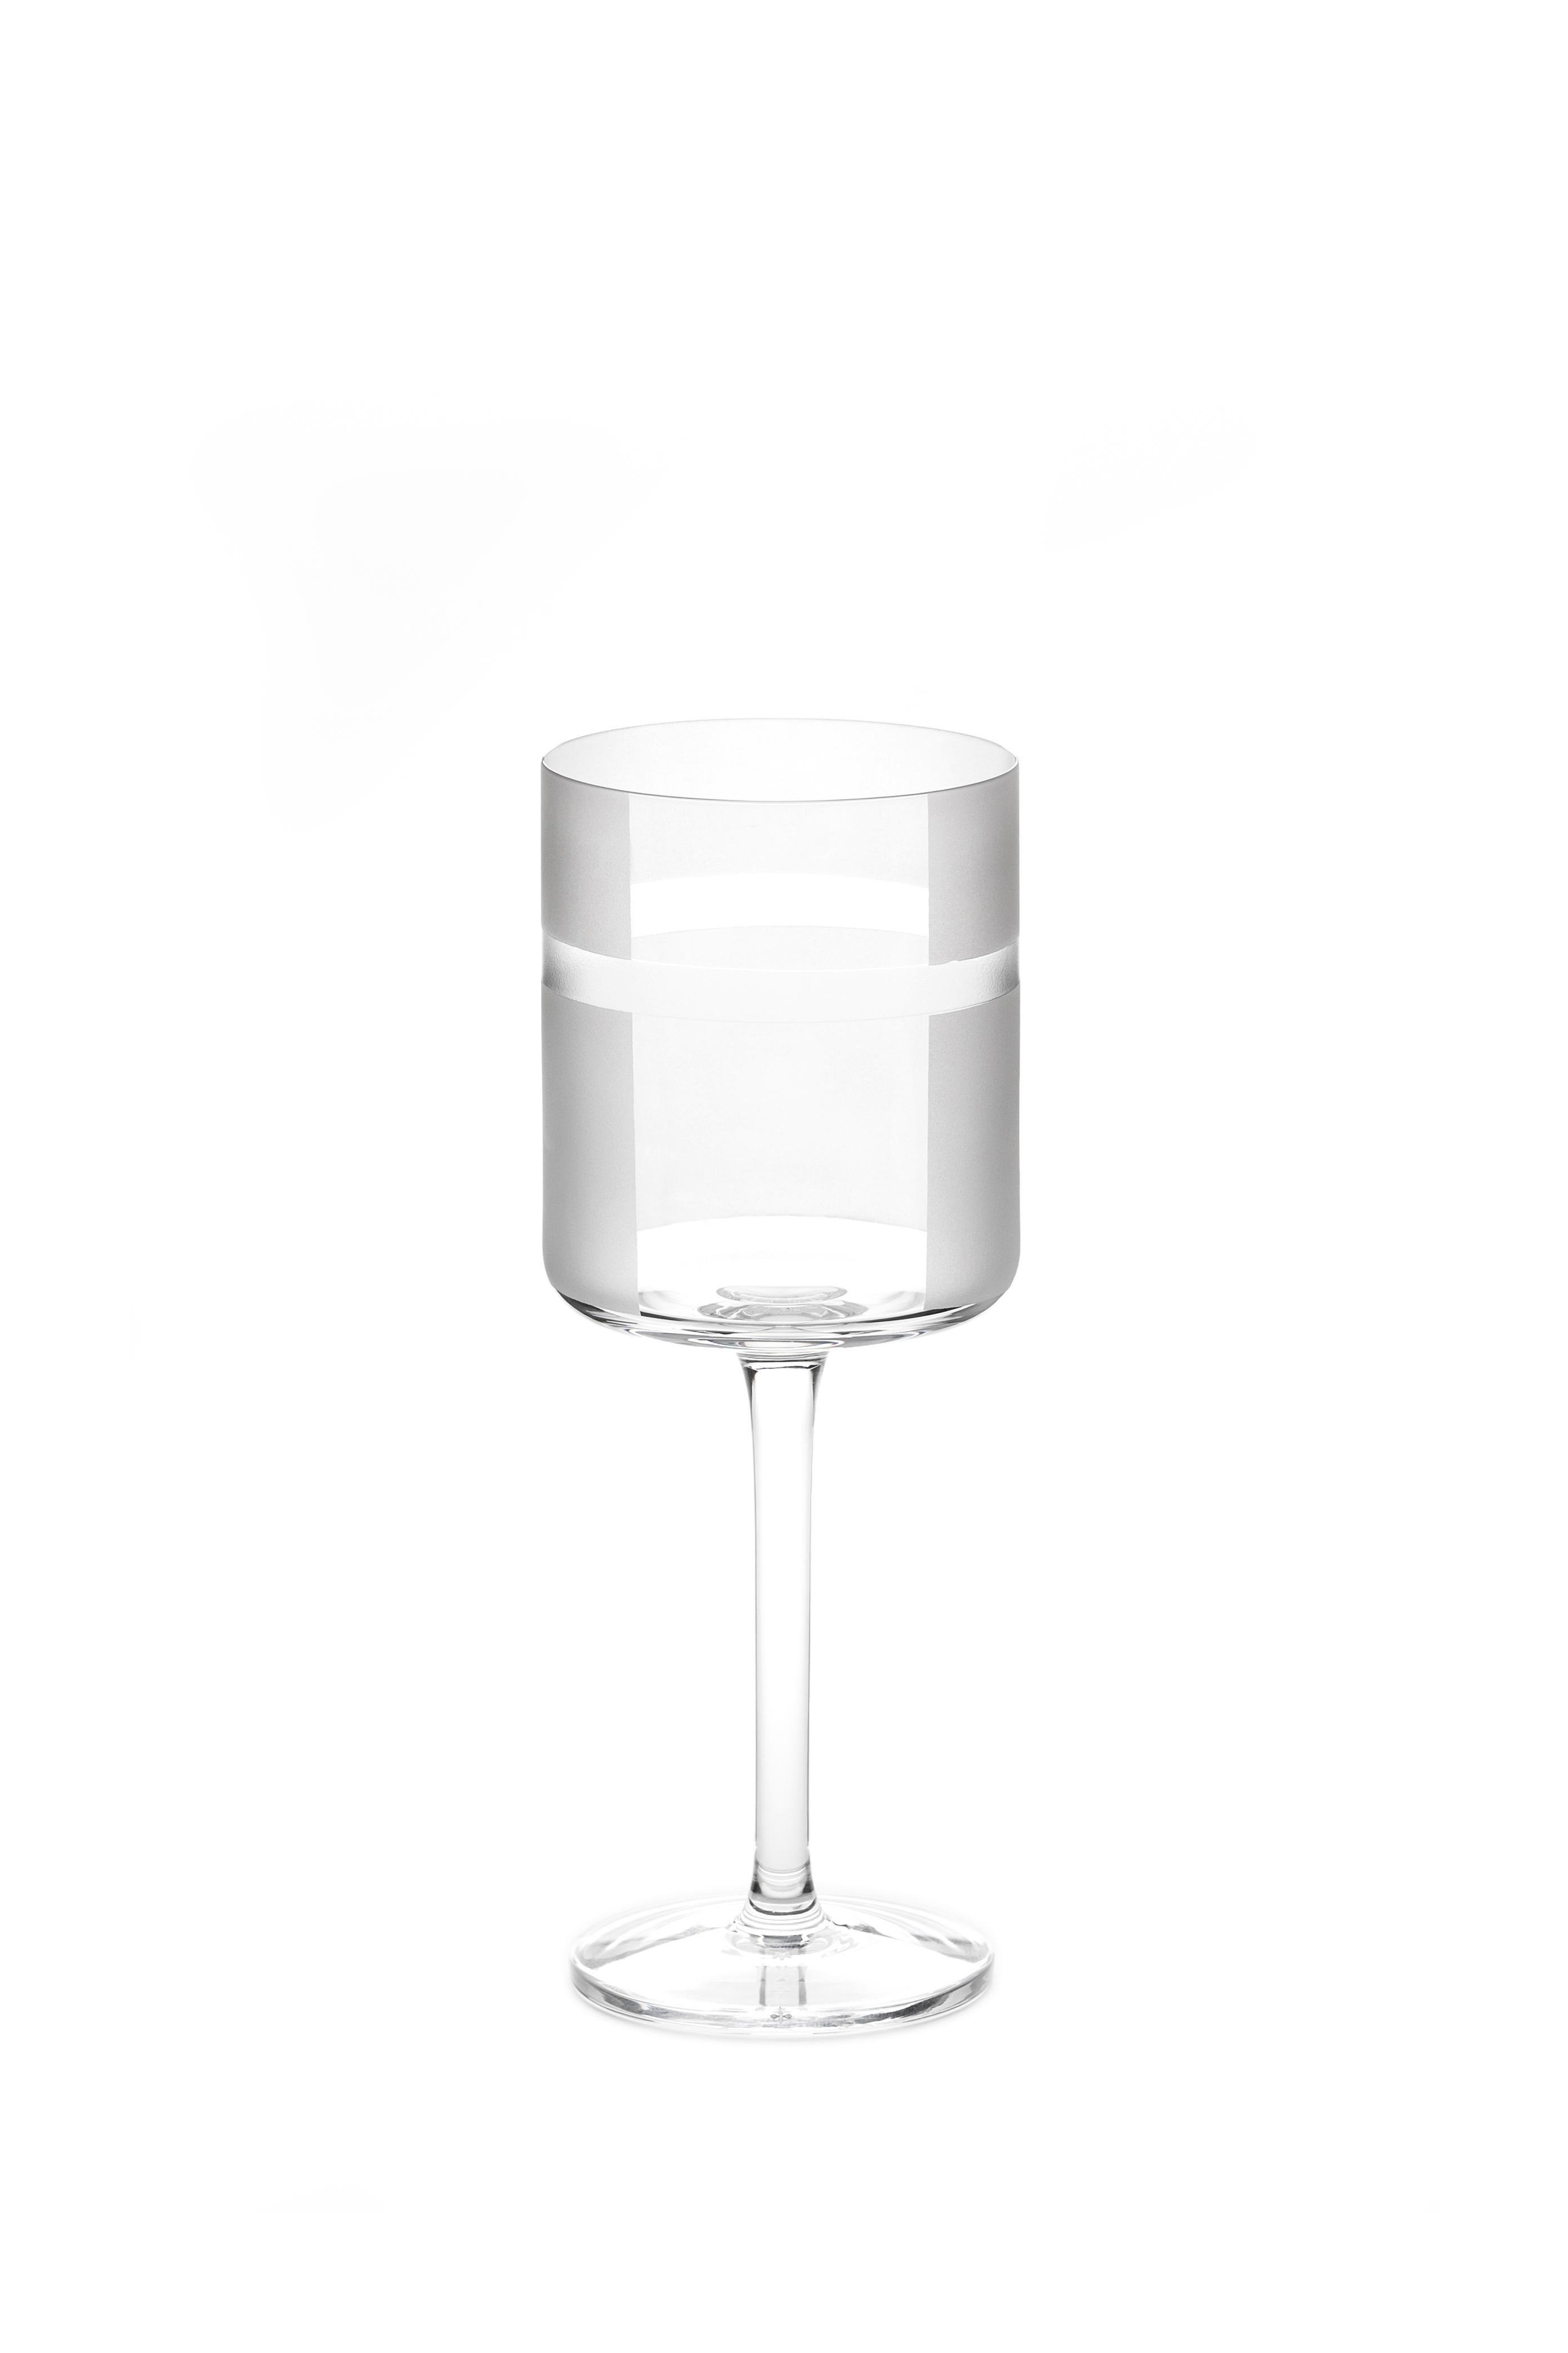 A white wine glass made by hand
A glass designed by Scholten & Baijings as part of our 'ELEMENTS' series.

The Collection: Elements
A rich canon of graphic markings defines the ELEMENTS series of lead crystal. Cuts and textures of varying depth